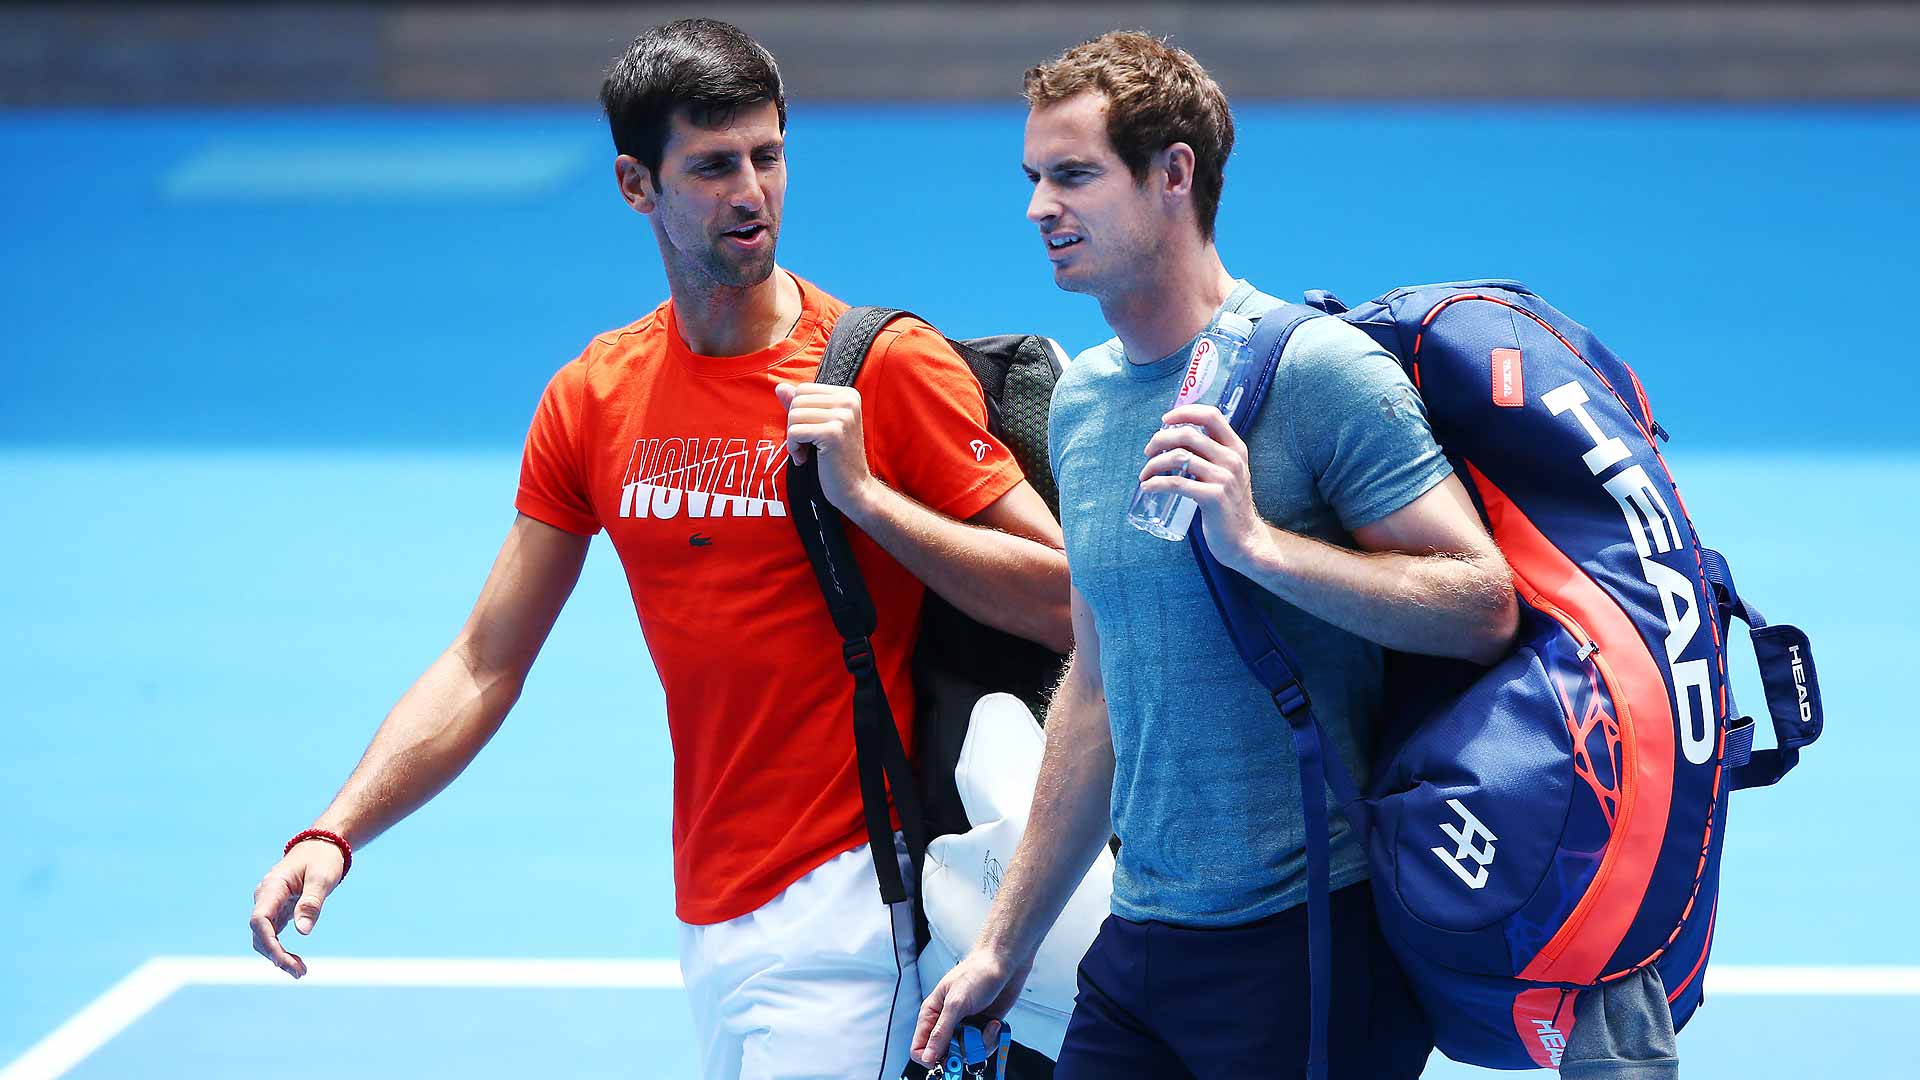 Ahead of the 2019 Australian Open, long-time rivals Novak Djokovic and Murray trained together